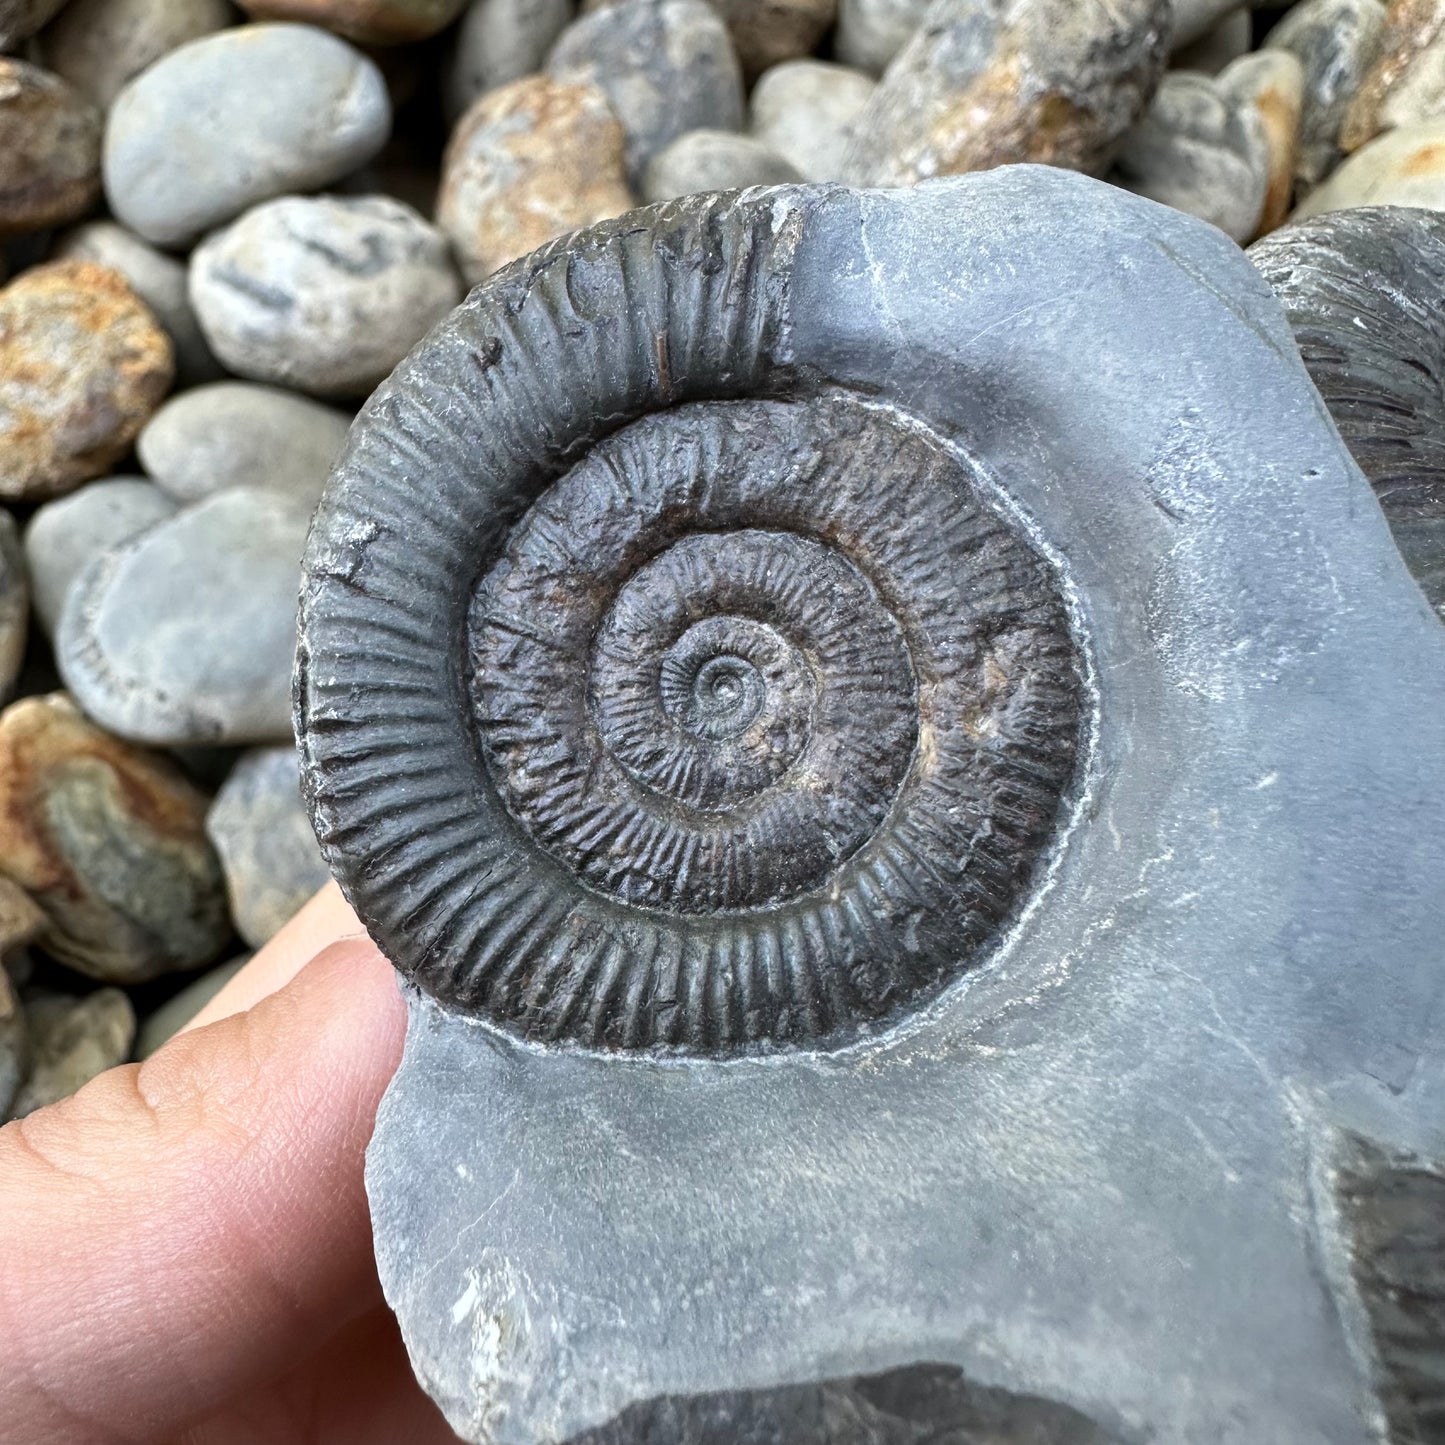 Dactylioceras ammonite fossil - Whitby, North Yorkshire, Yorkshire Fossils found on the Jurassic Coast